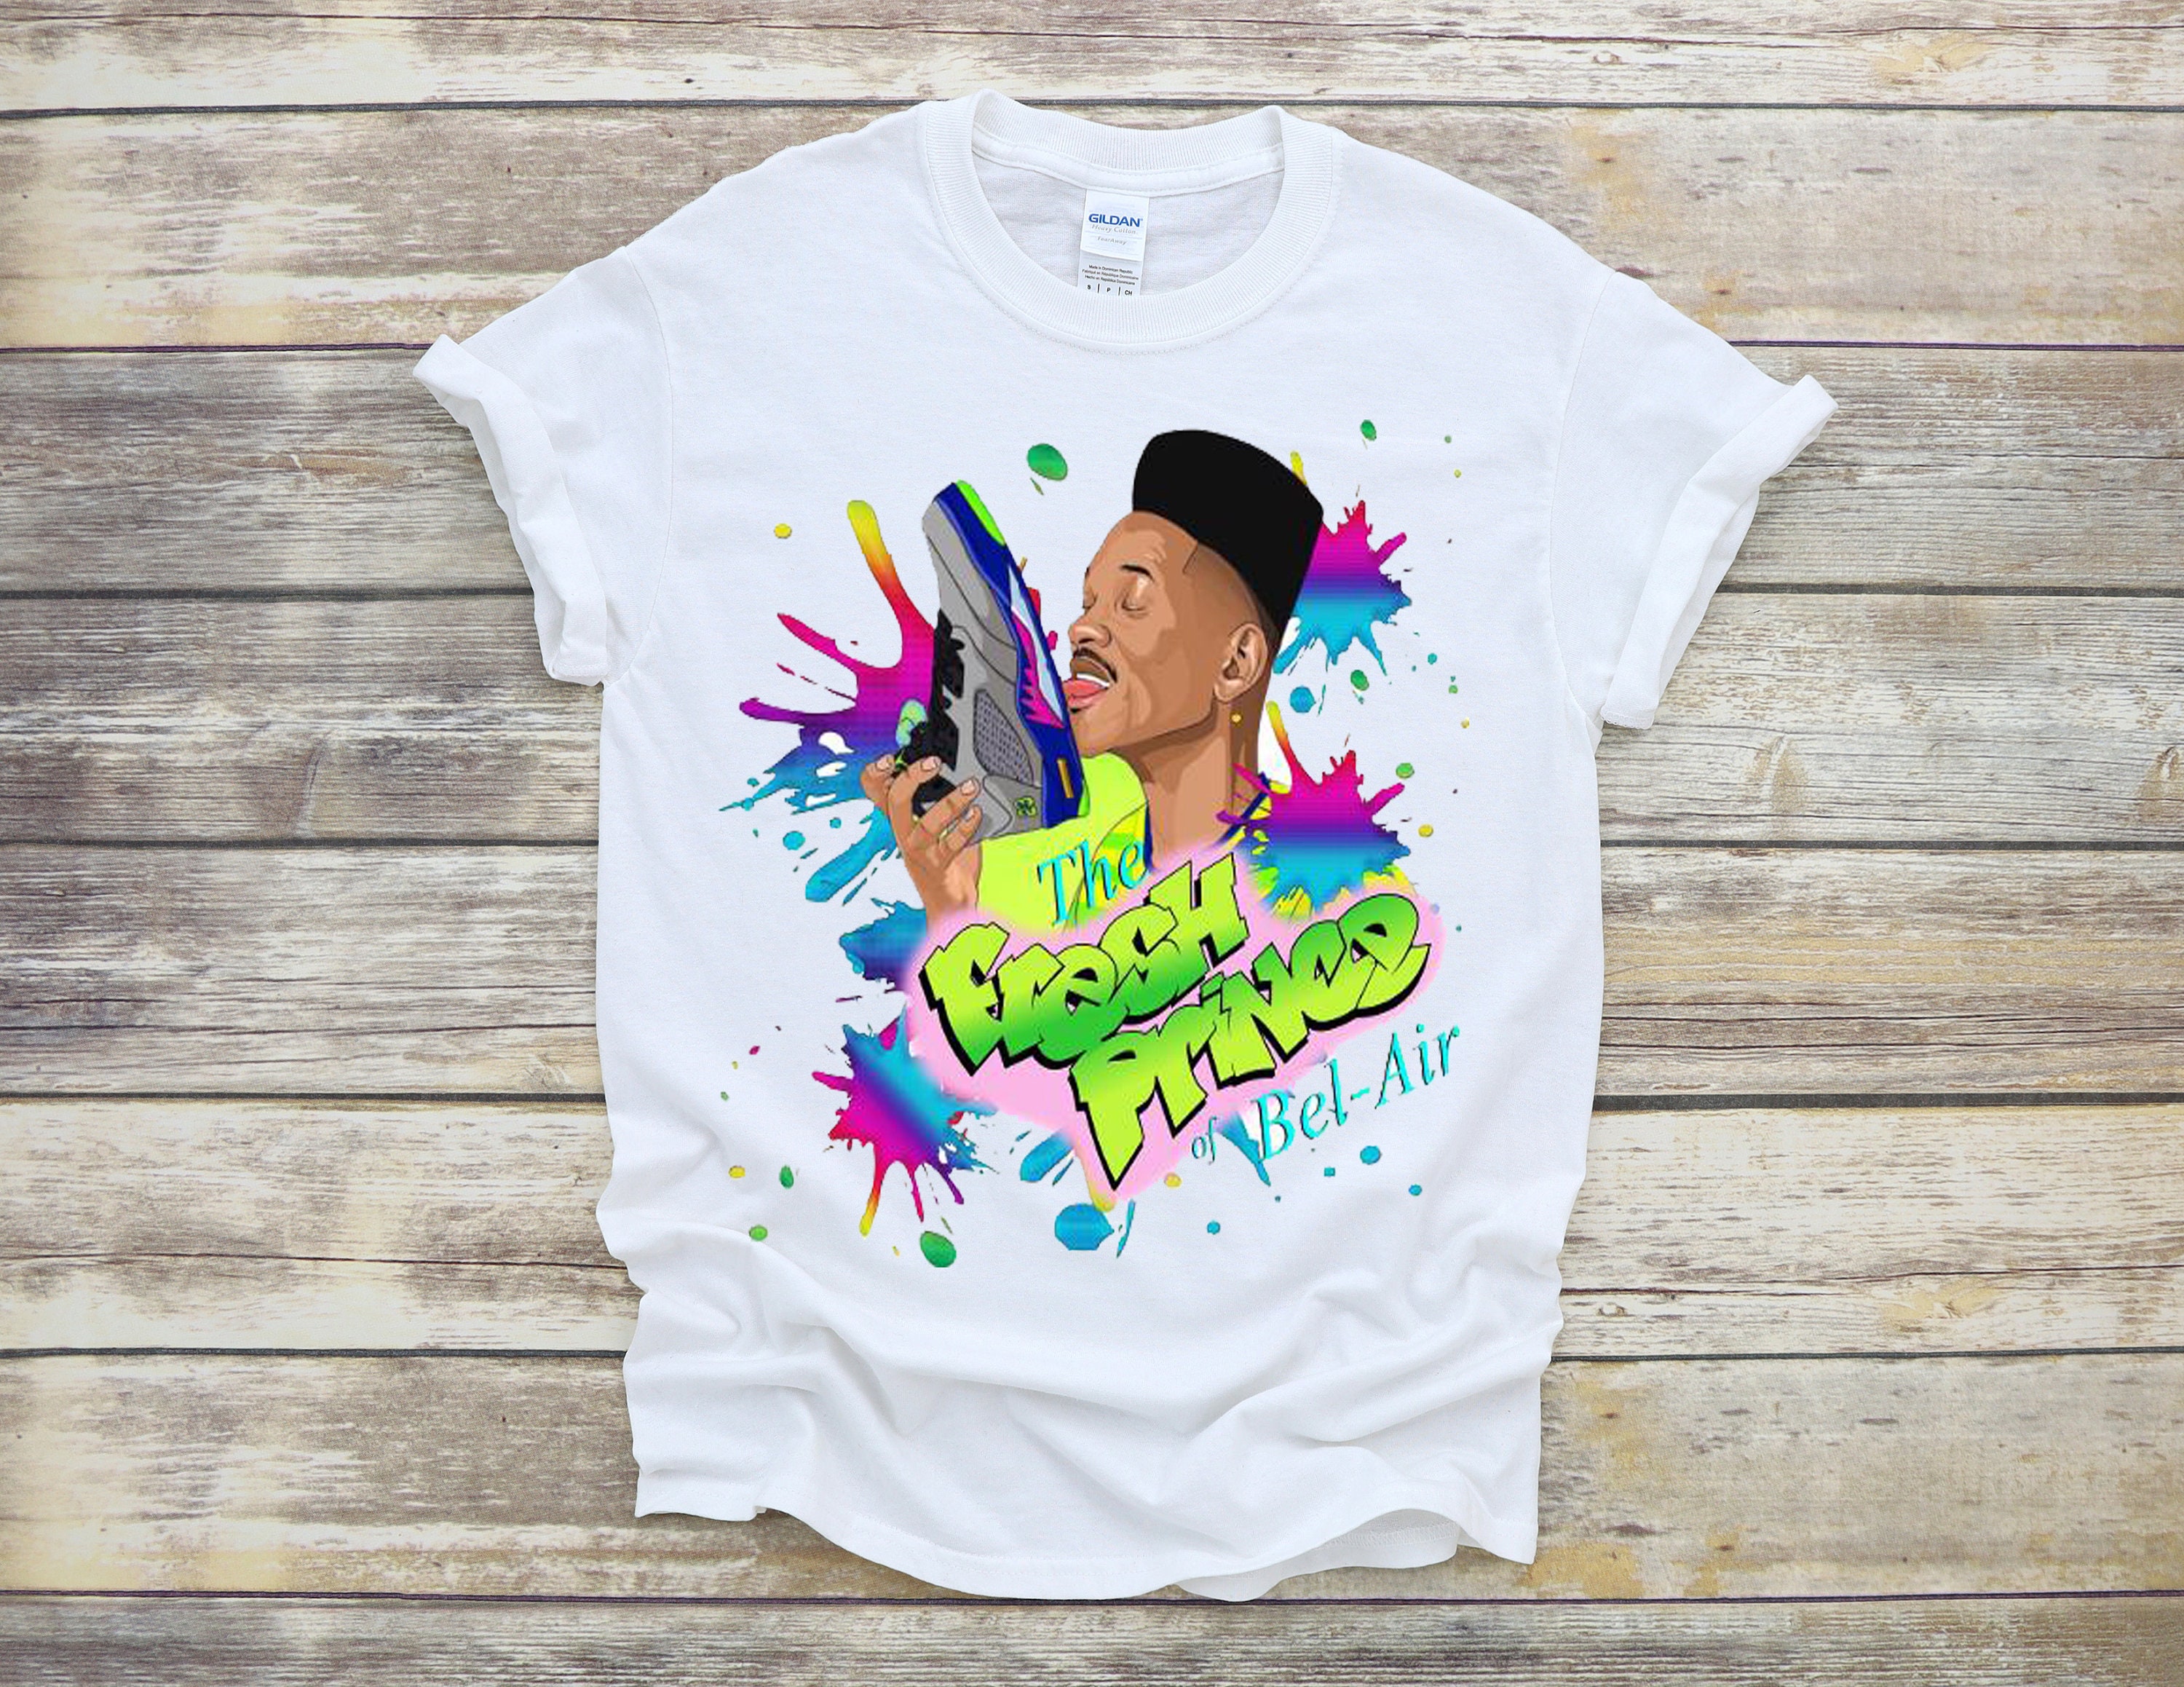 Vintage Fresh Prince of Bel Air Theme Song by Will Smith Yo Homes Smell Ya Later T Shirt Size Small